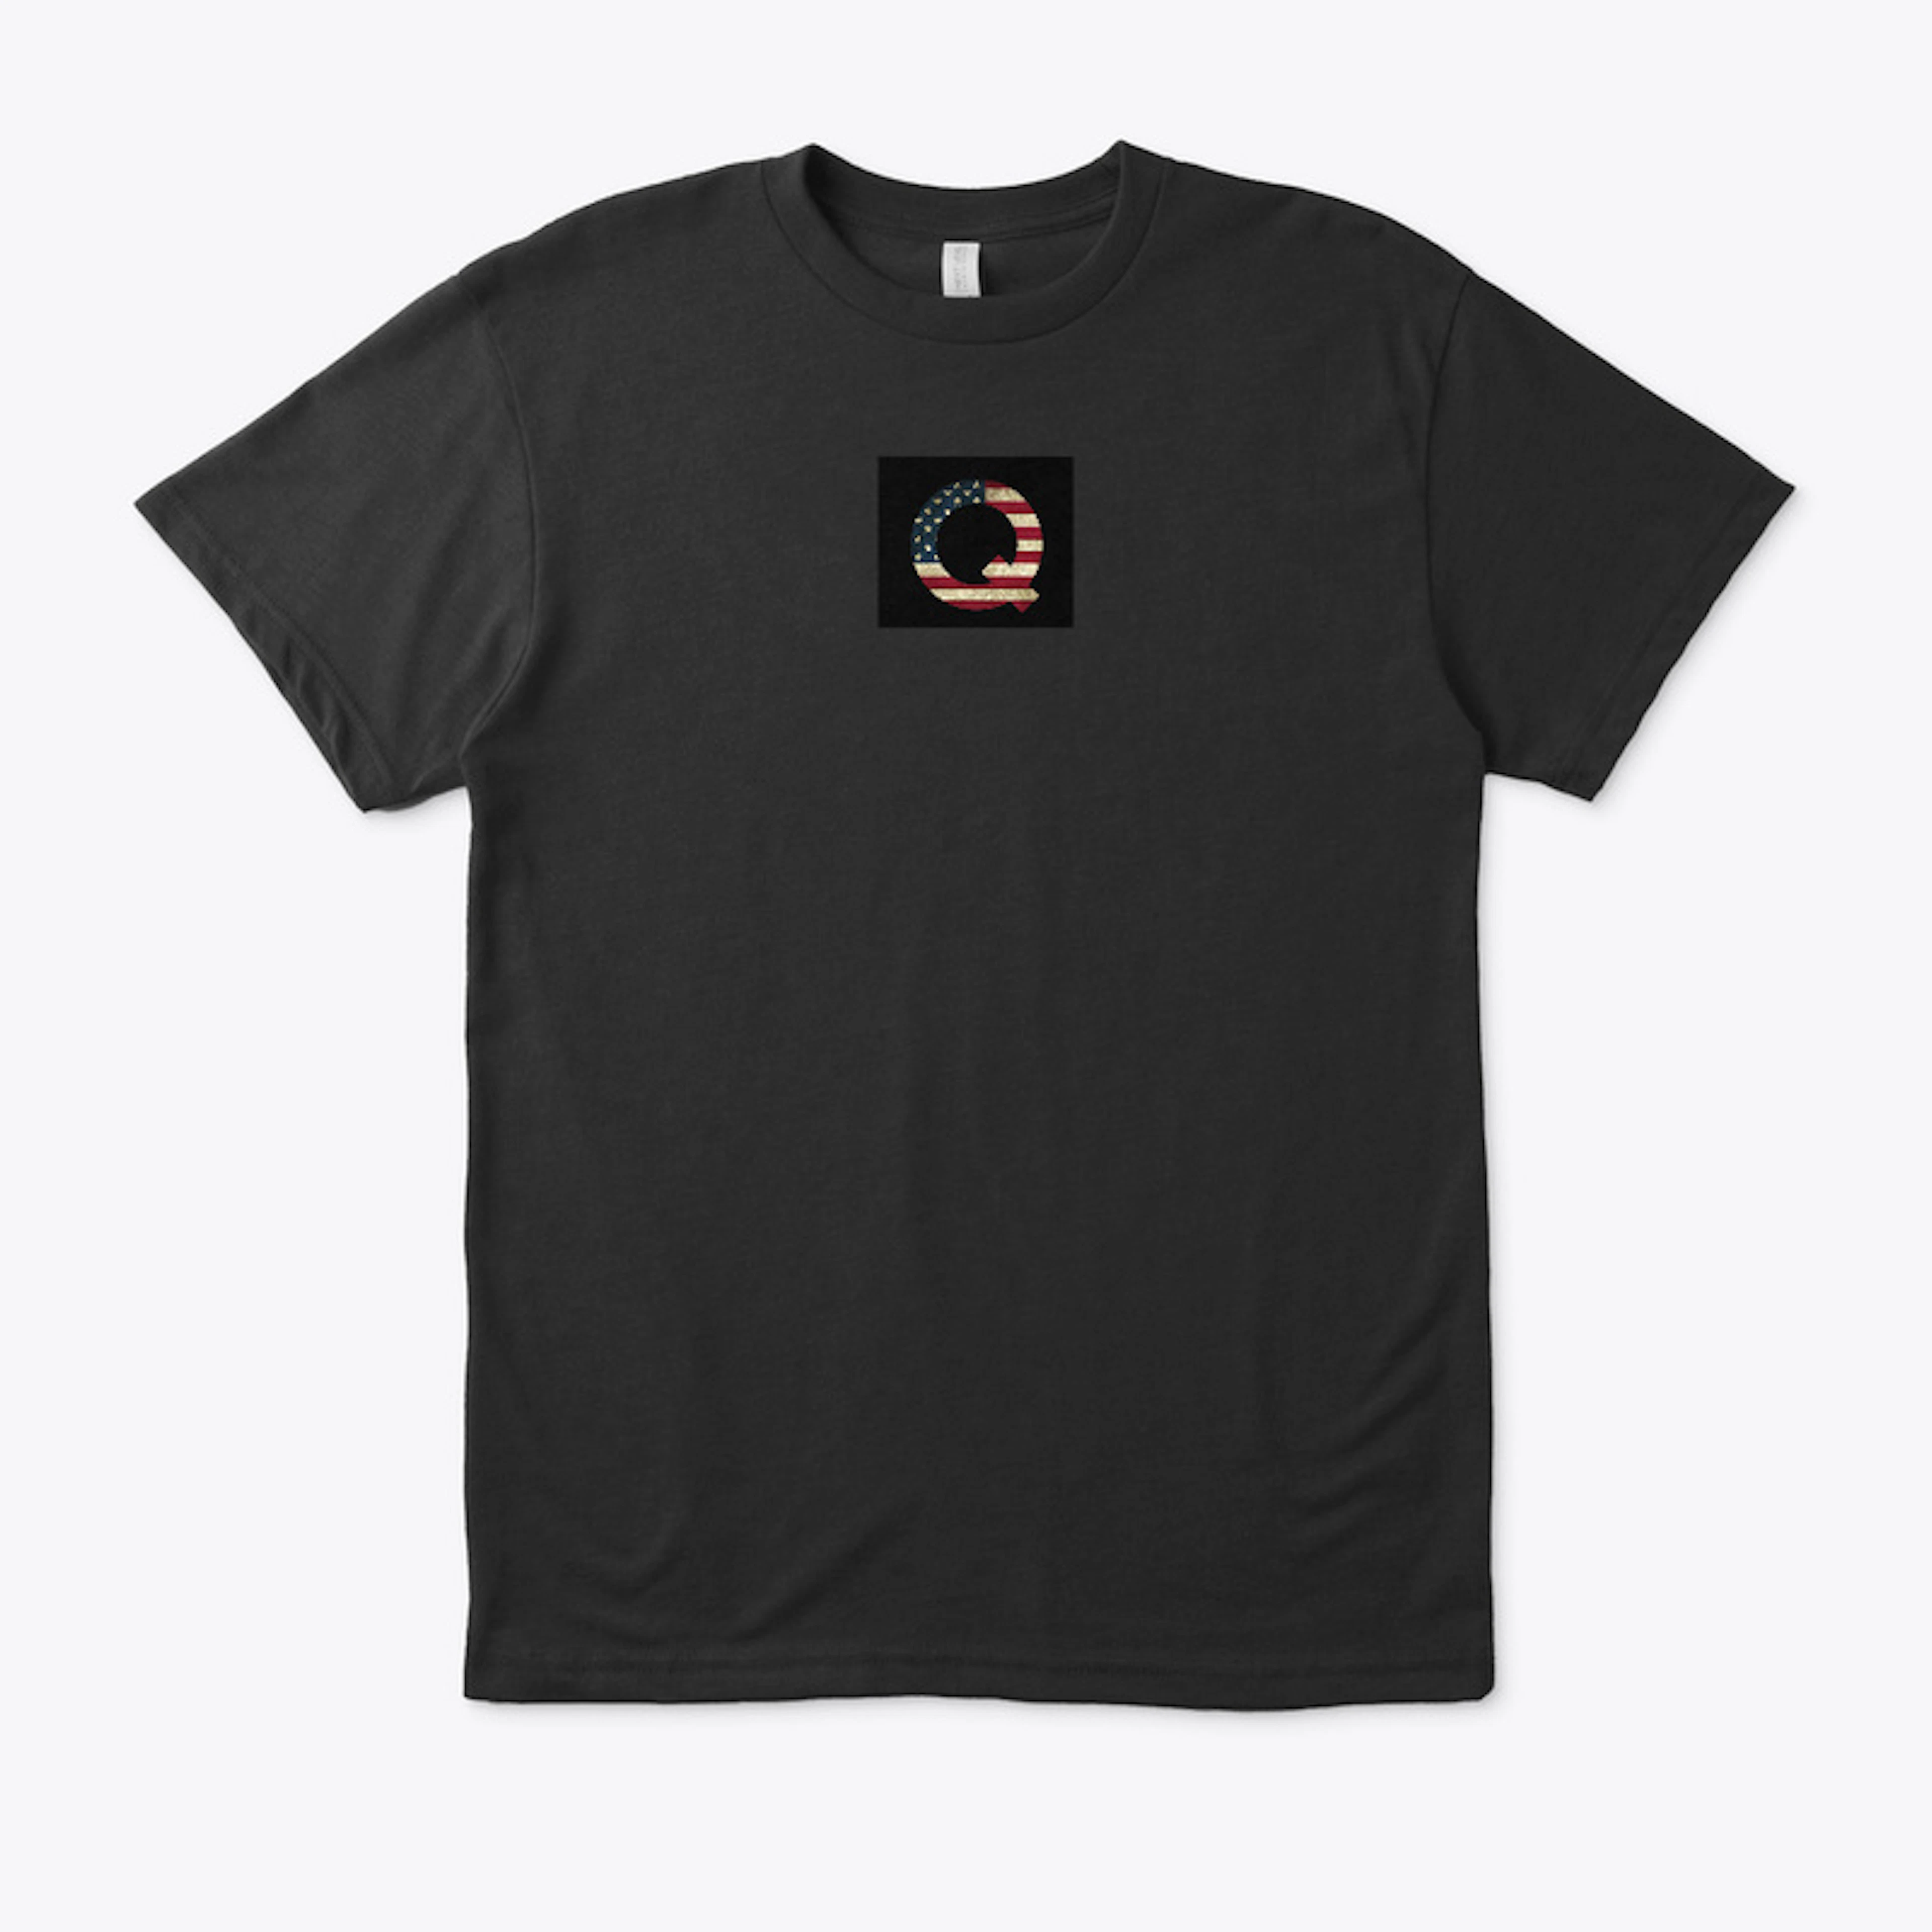 The QUESTLIFE LOGO collection